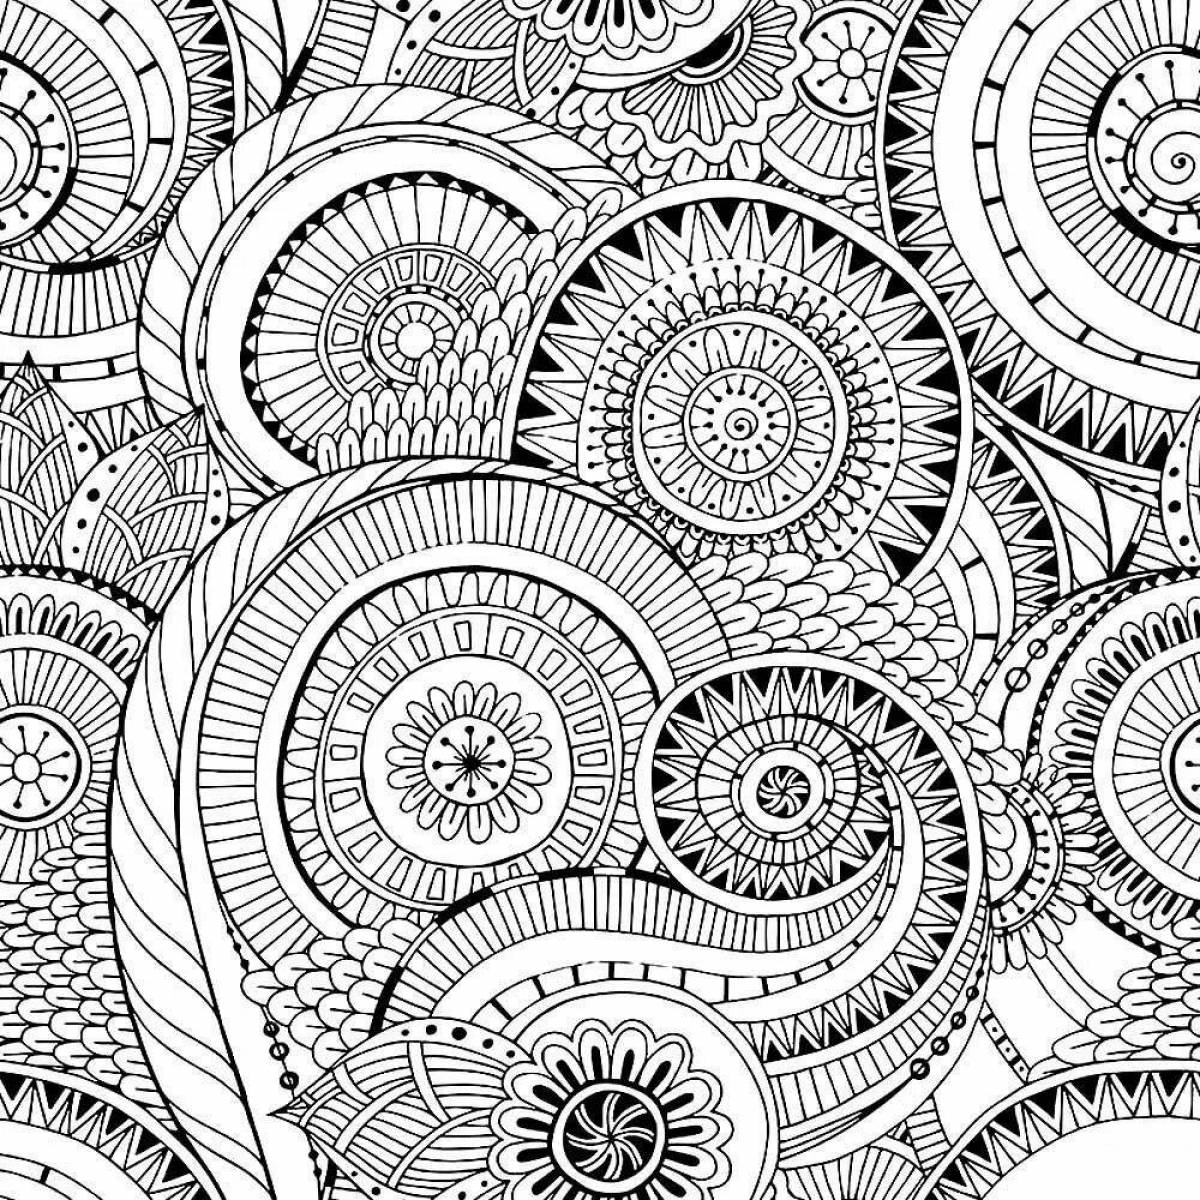 Dazzling coloring pages with small patterns